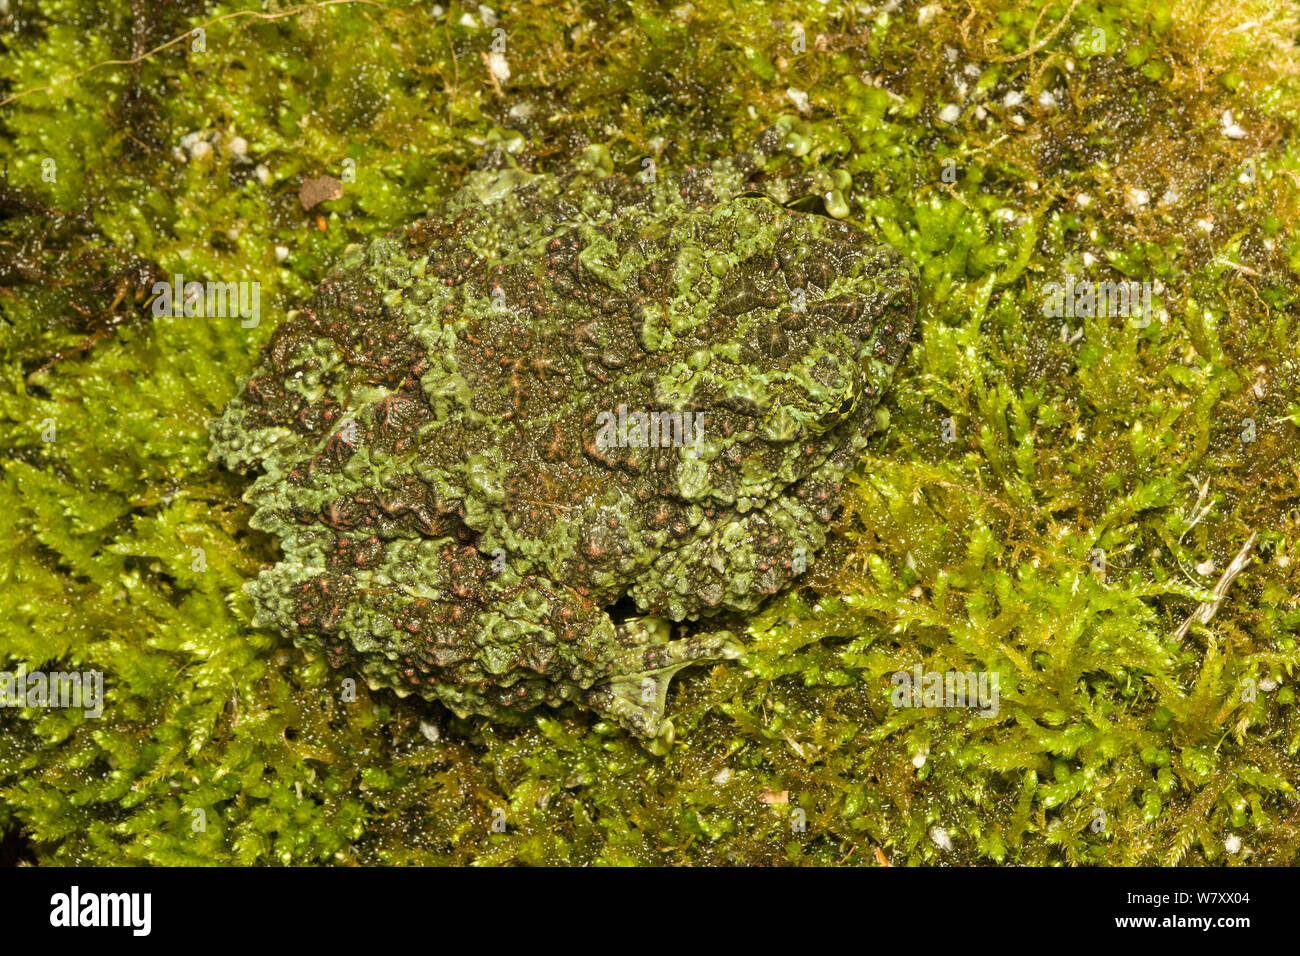 Mossy frogs (Theloderma corticale) camouflaged, captive occurs in Vietnam. Stock Photo